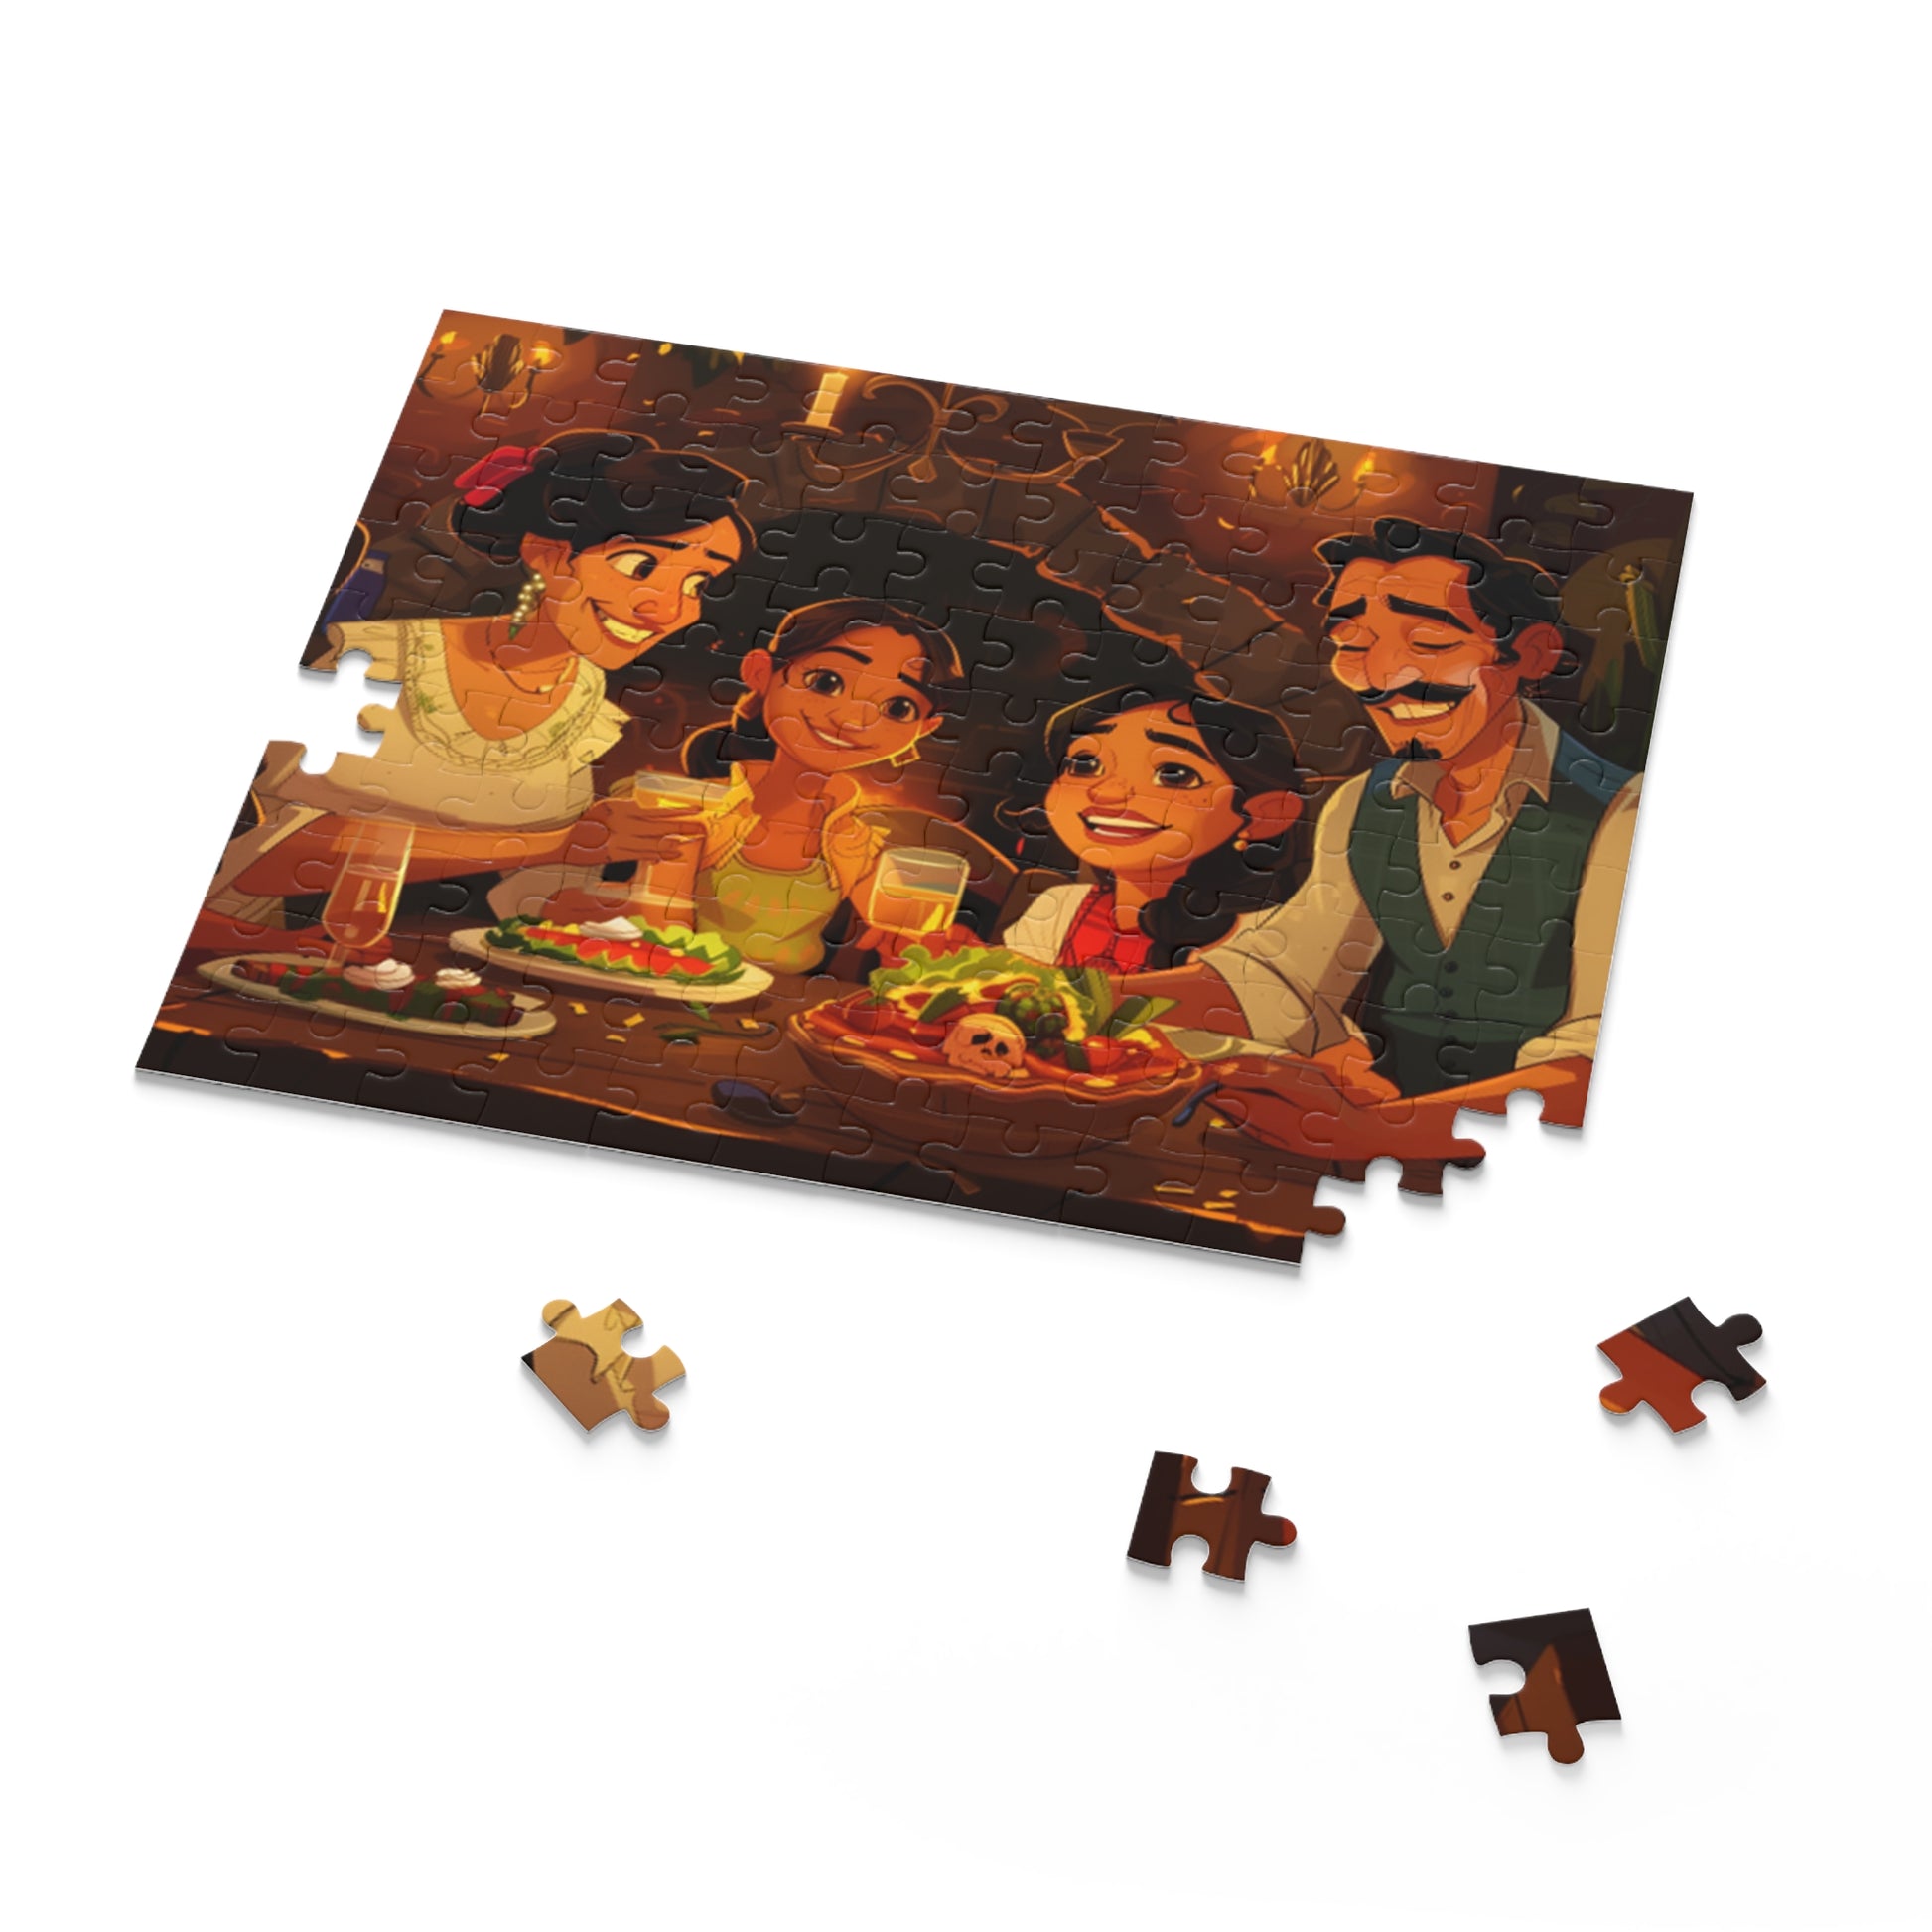 Mexican Lovely Family Dinner Retro Art Jigsaw Puzzle Adult Birthday Business Jigsaw Puzzle Gift for Him Funny Humorous Indoor Outdoor Game Gift For Her Online-7